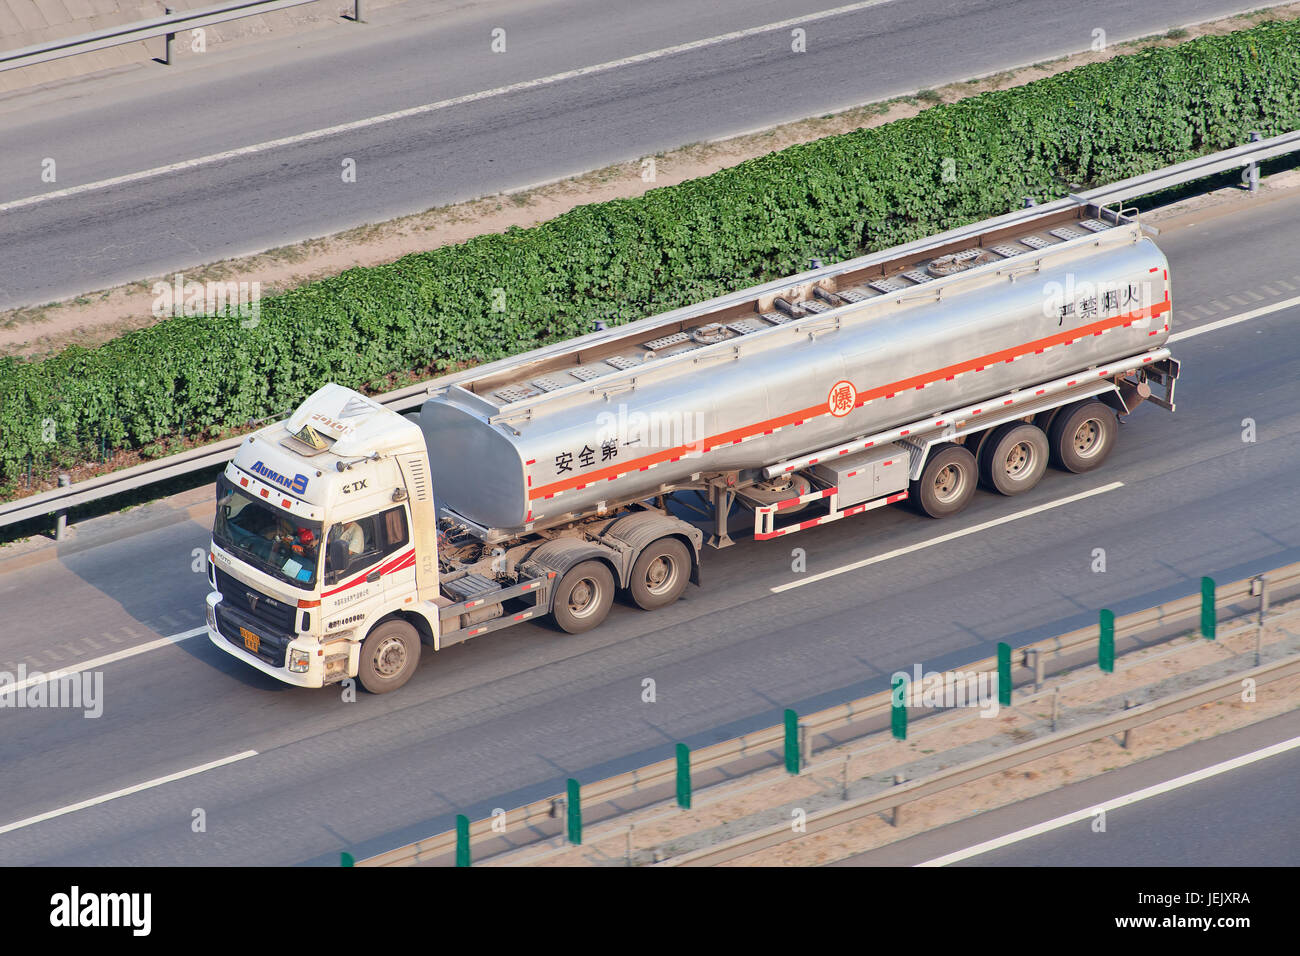 BEIJING-JULY 7, 2015. Auman truck with Liquid gas. Foton makes commercial trucks in a joint venture with Daimler AG (Beijing Foton Daimler Automobile). Stock Photo